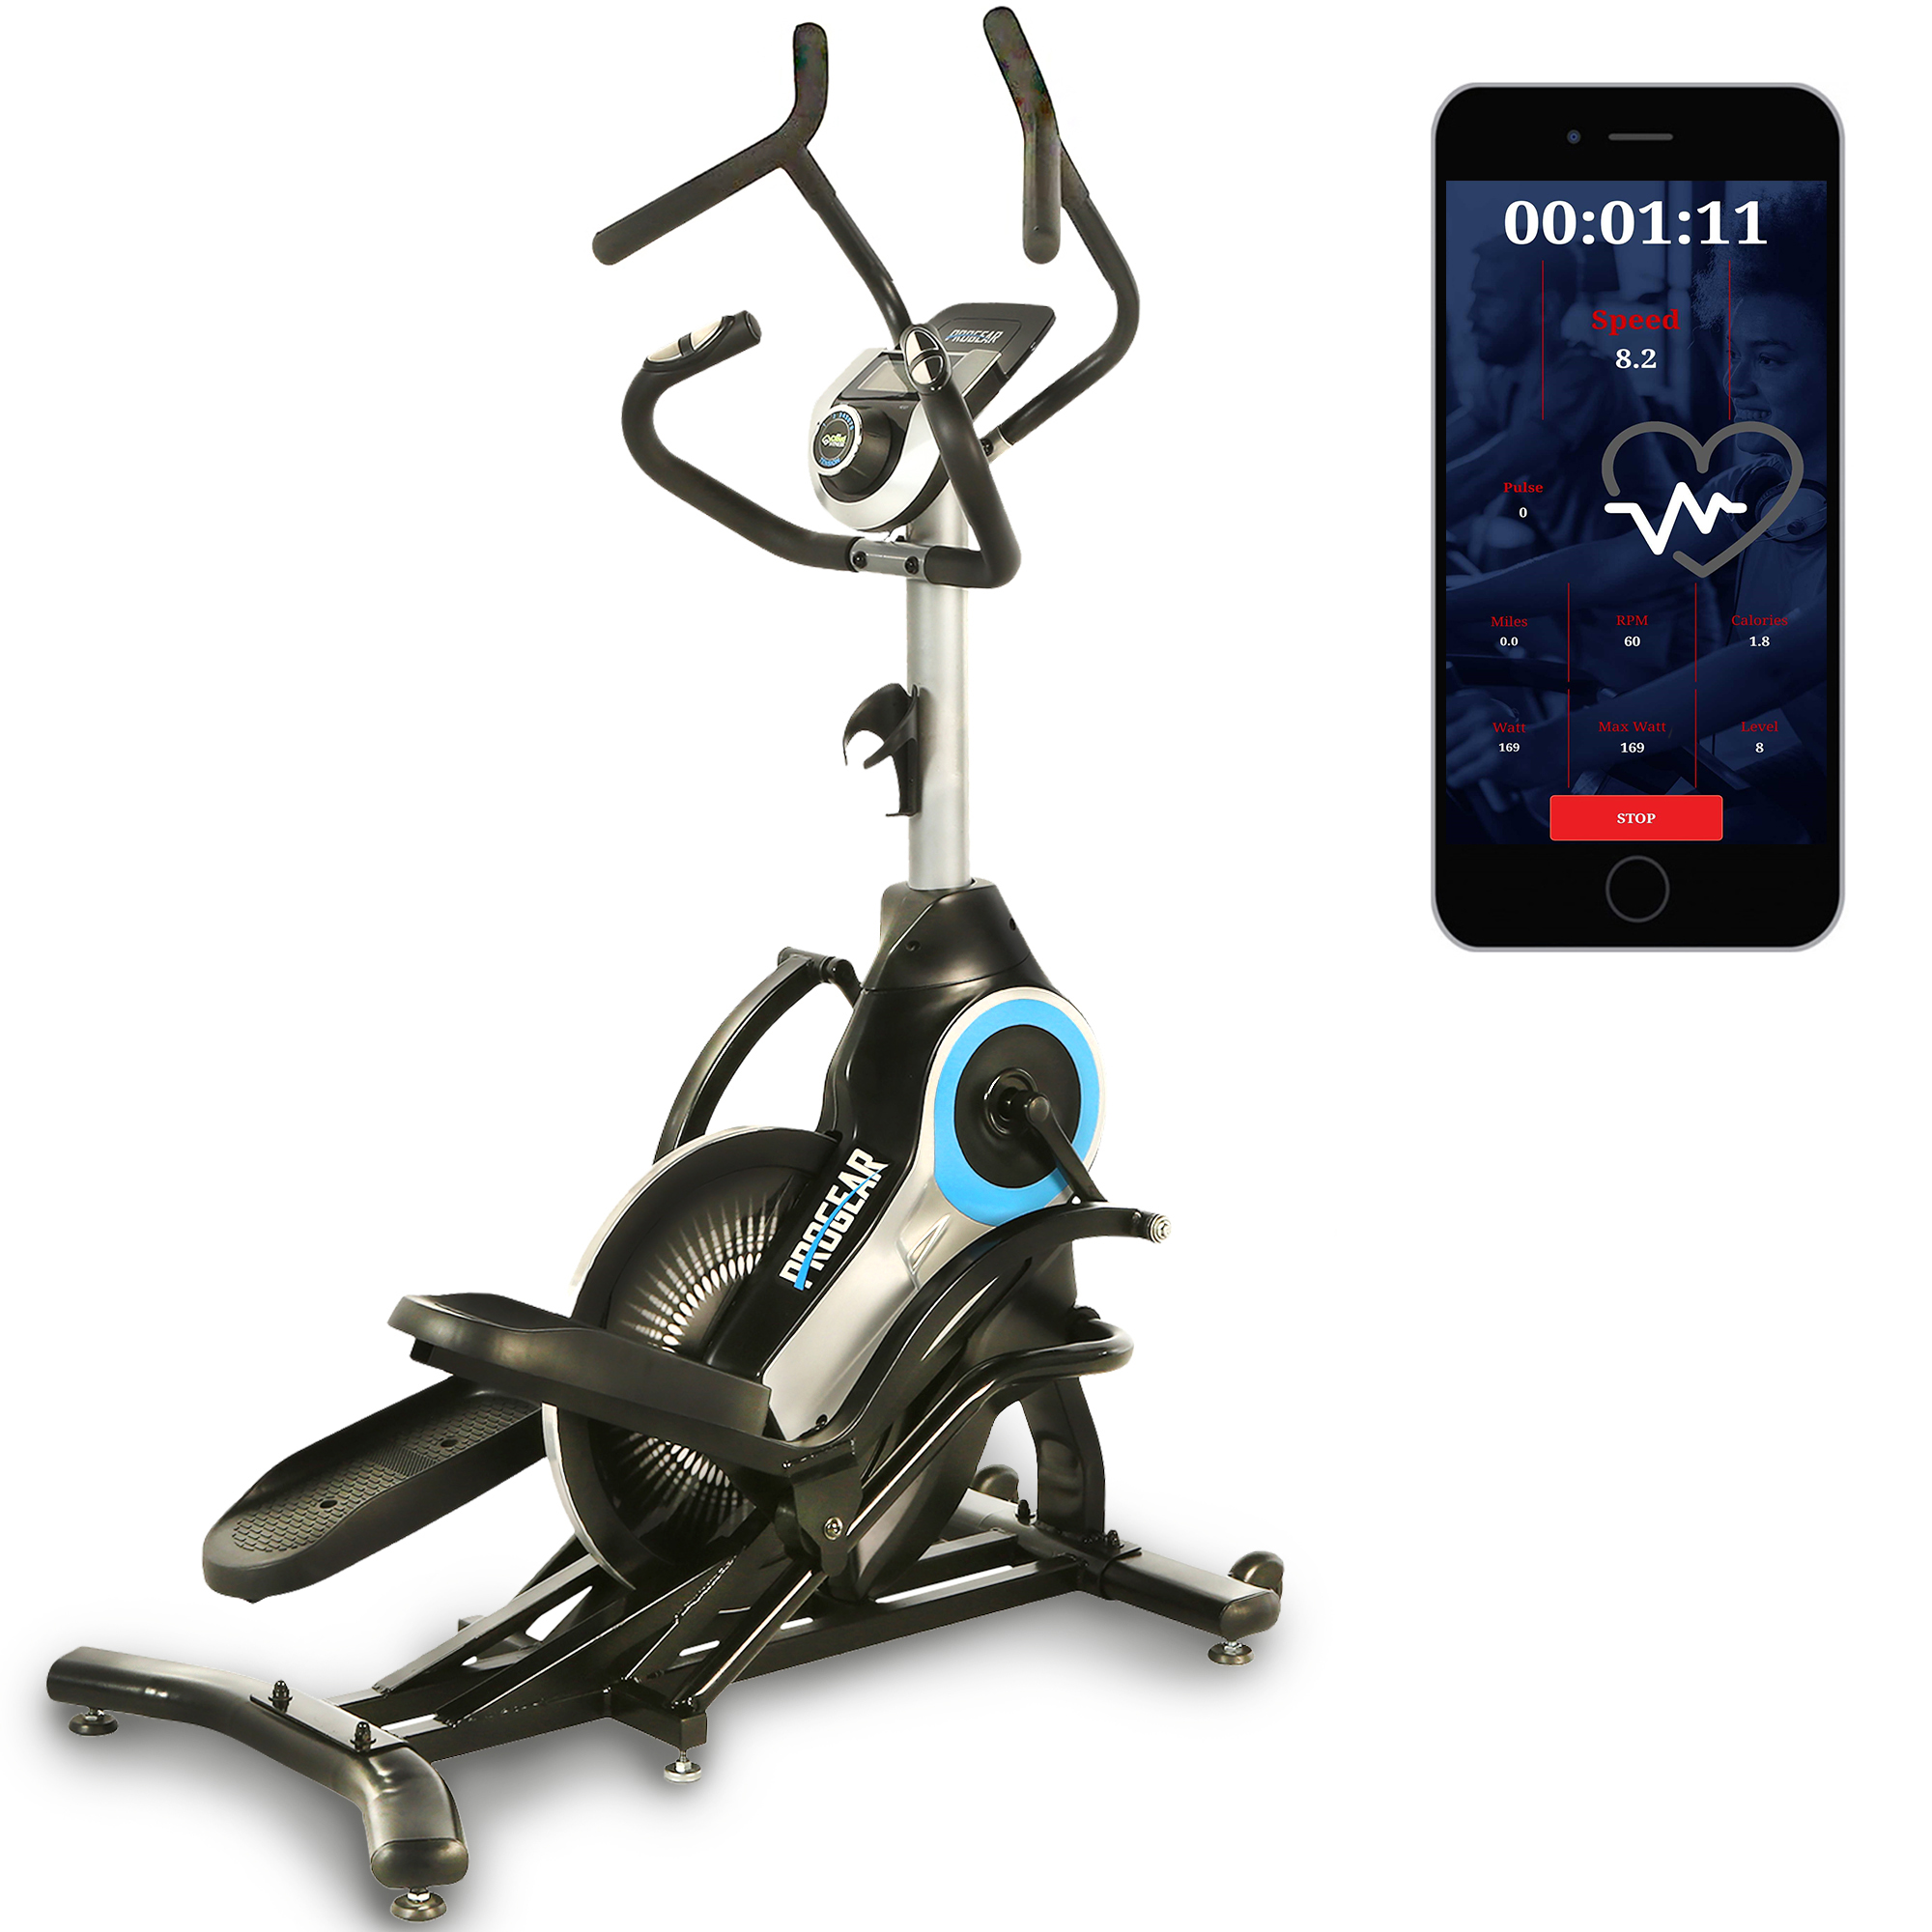 PROGEAR 9900 HIIT Bluetooth Smart Cloud Fitness Crossover Stepper/ Elliptical Trainer with Goal Setting and Free App - image 1 of 19